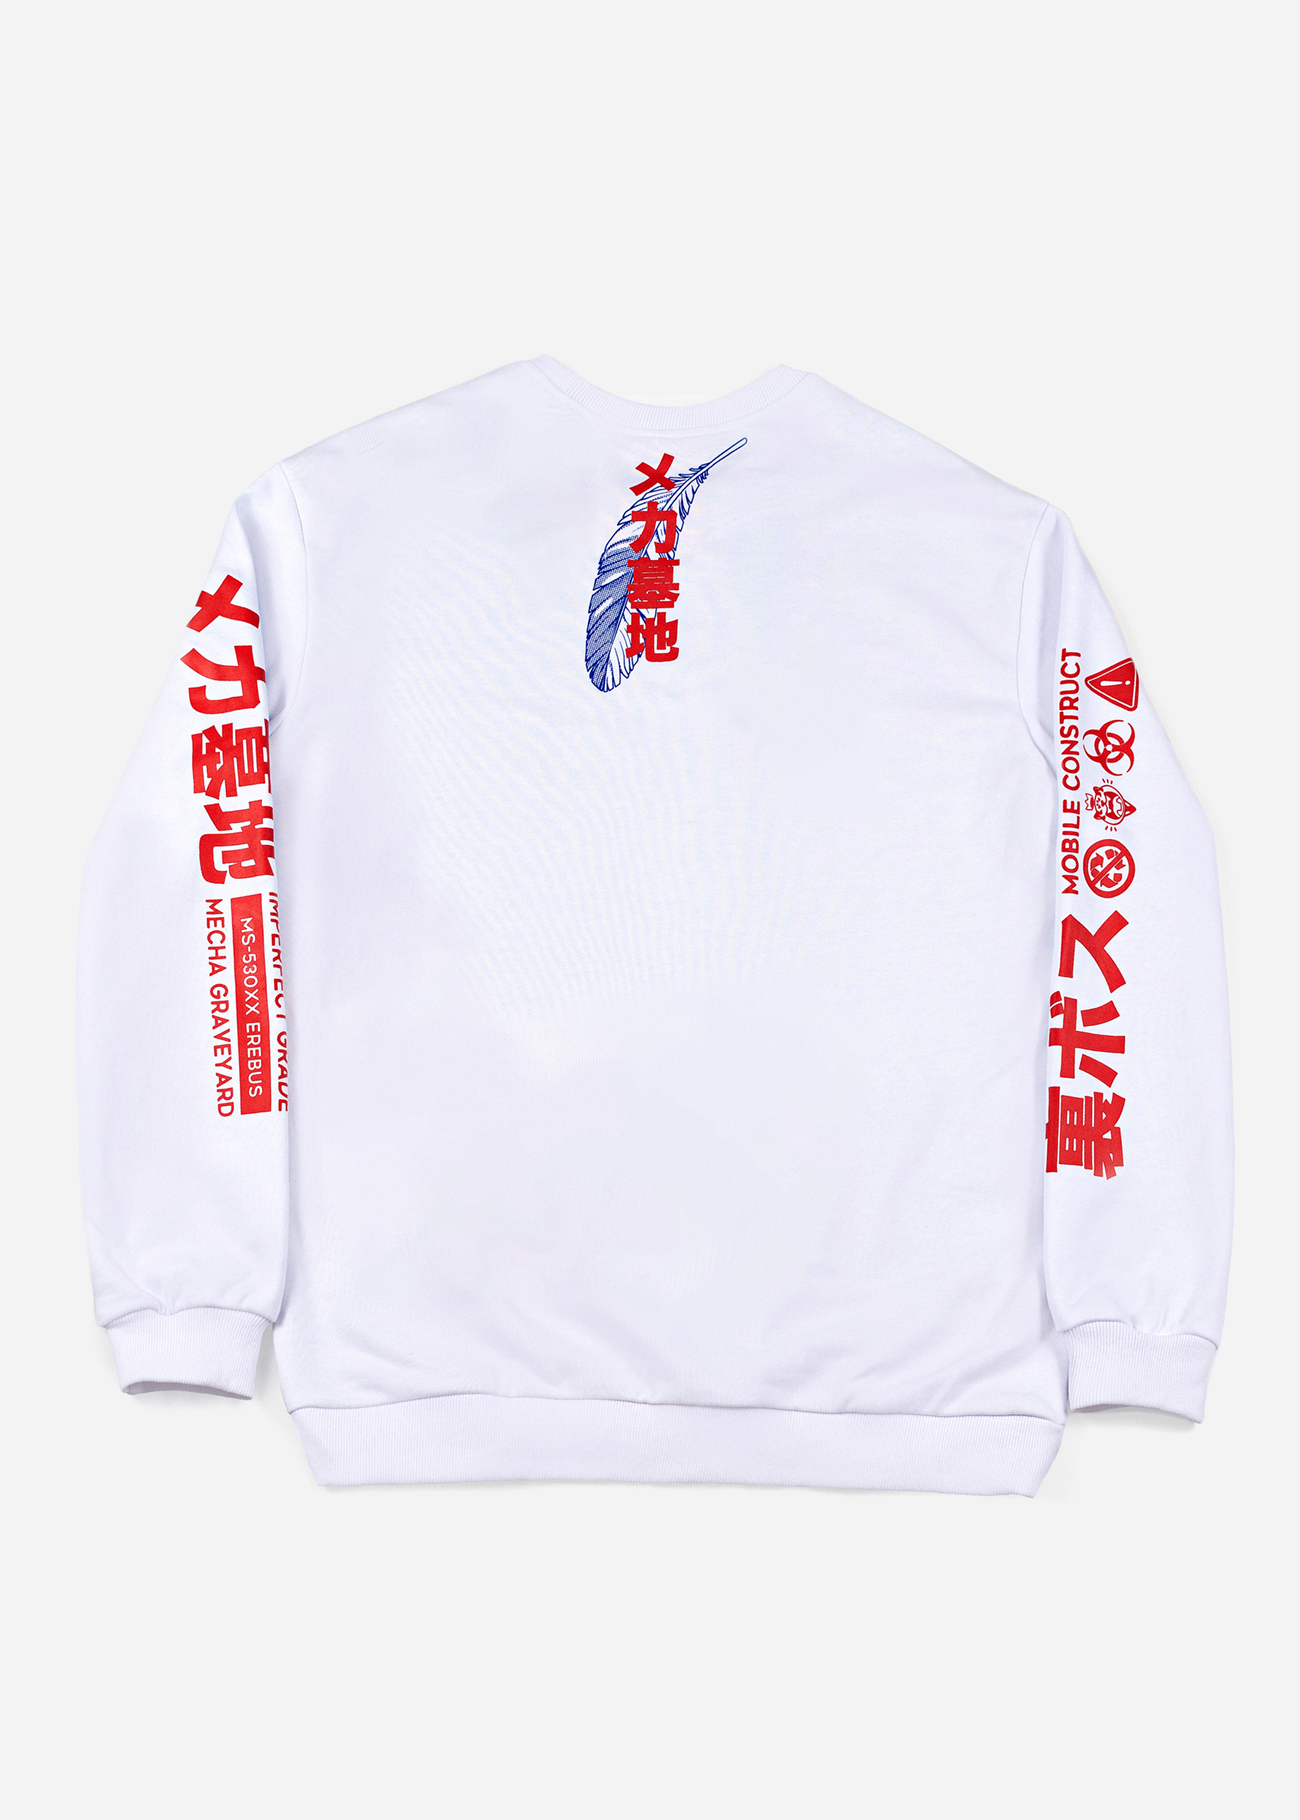 Back photo of the Sky Killer design, featuring a large mecha anime design screen printed on the front of a white anime sweater